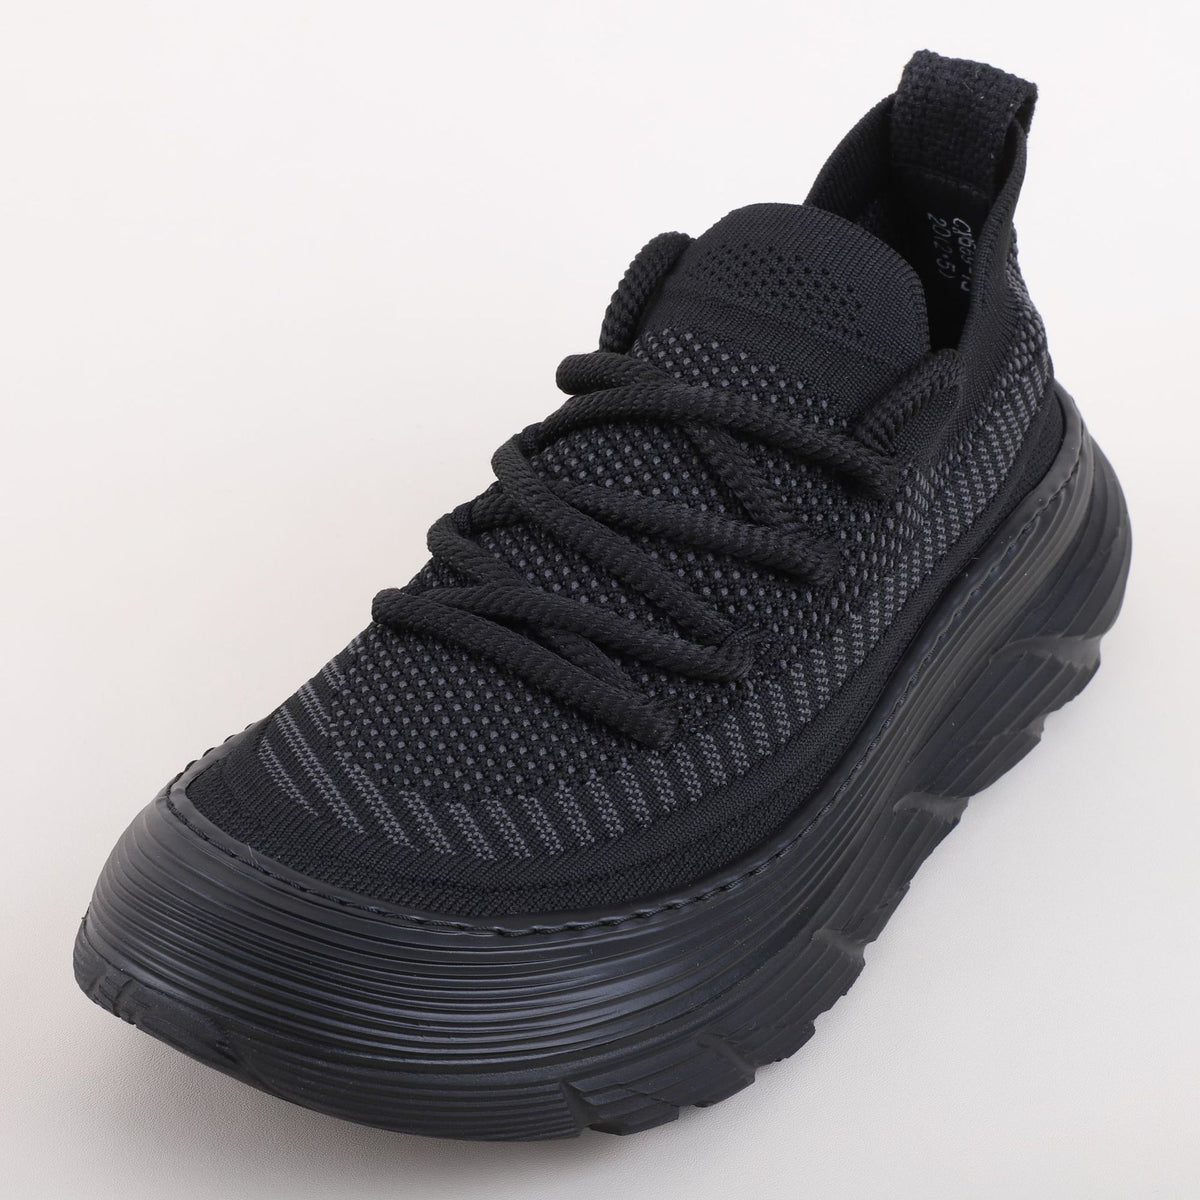 Men's breathable sports and casual shoes